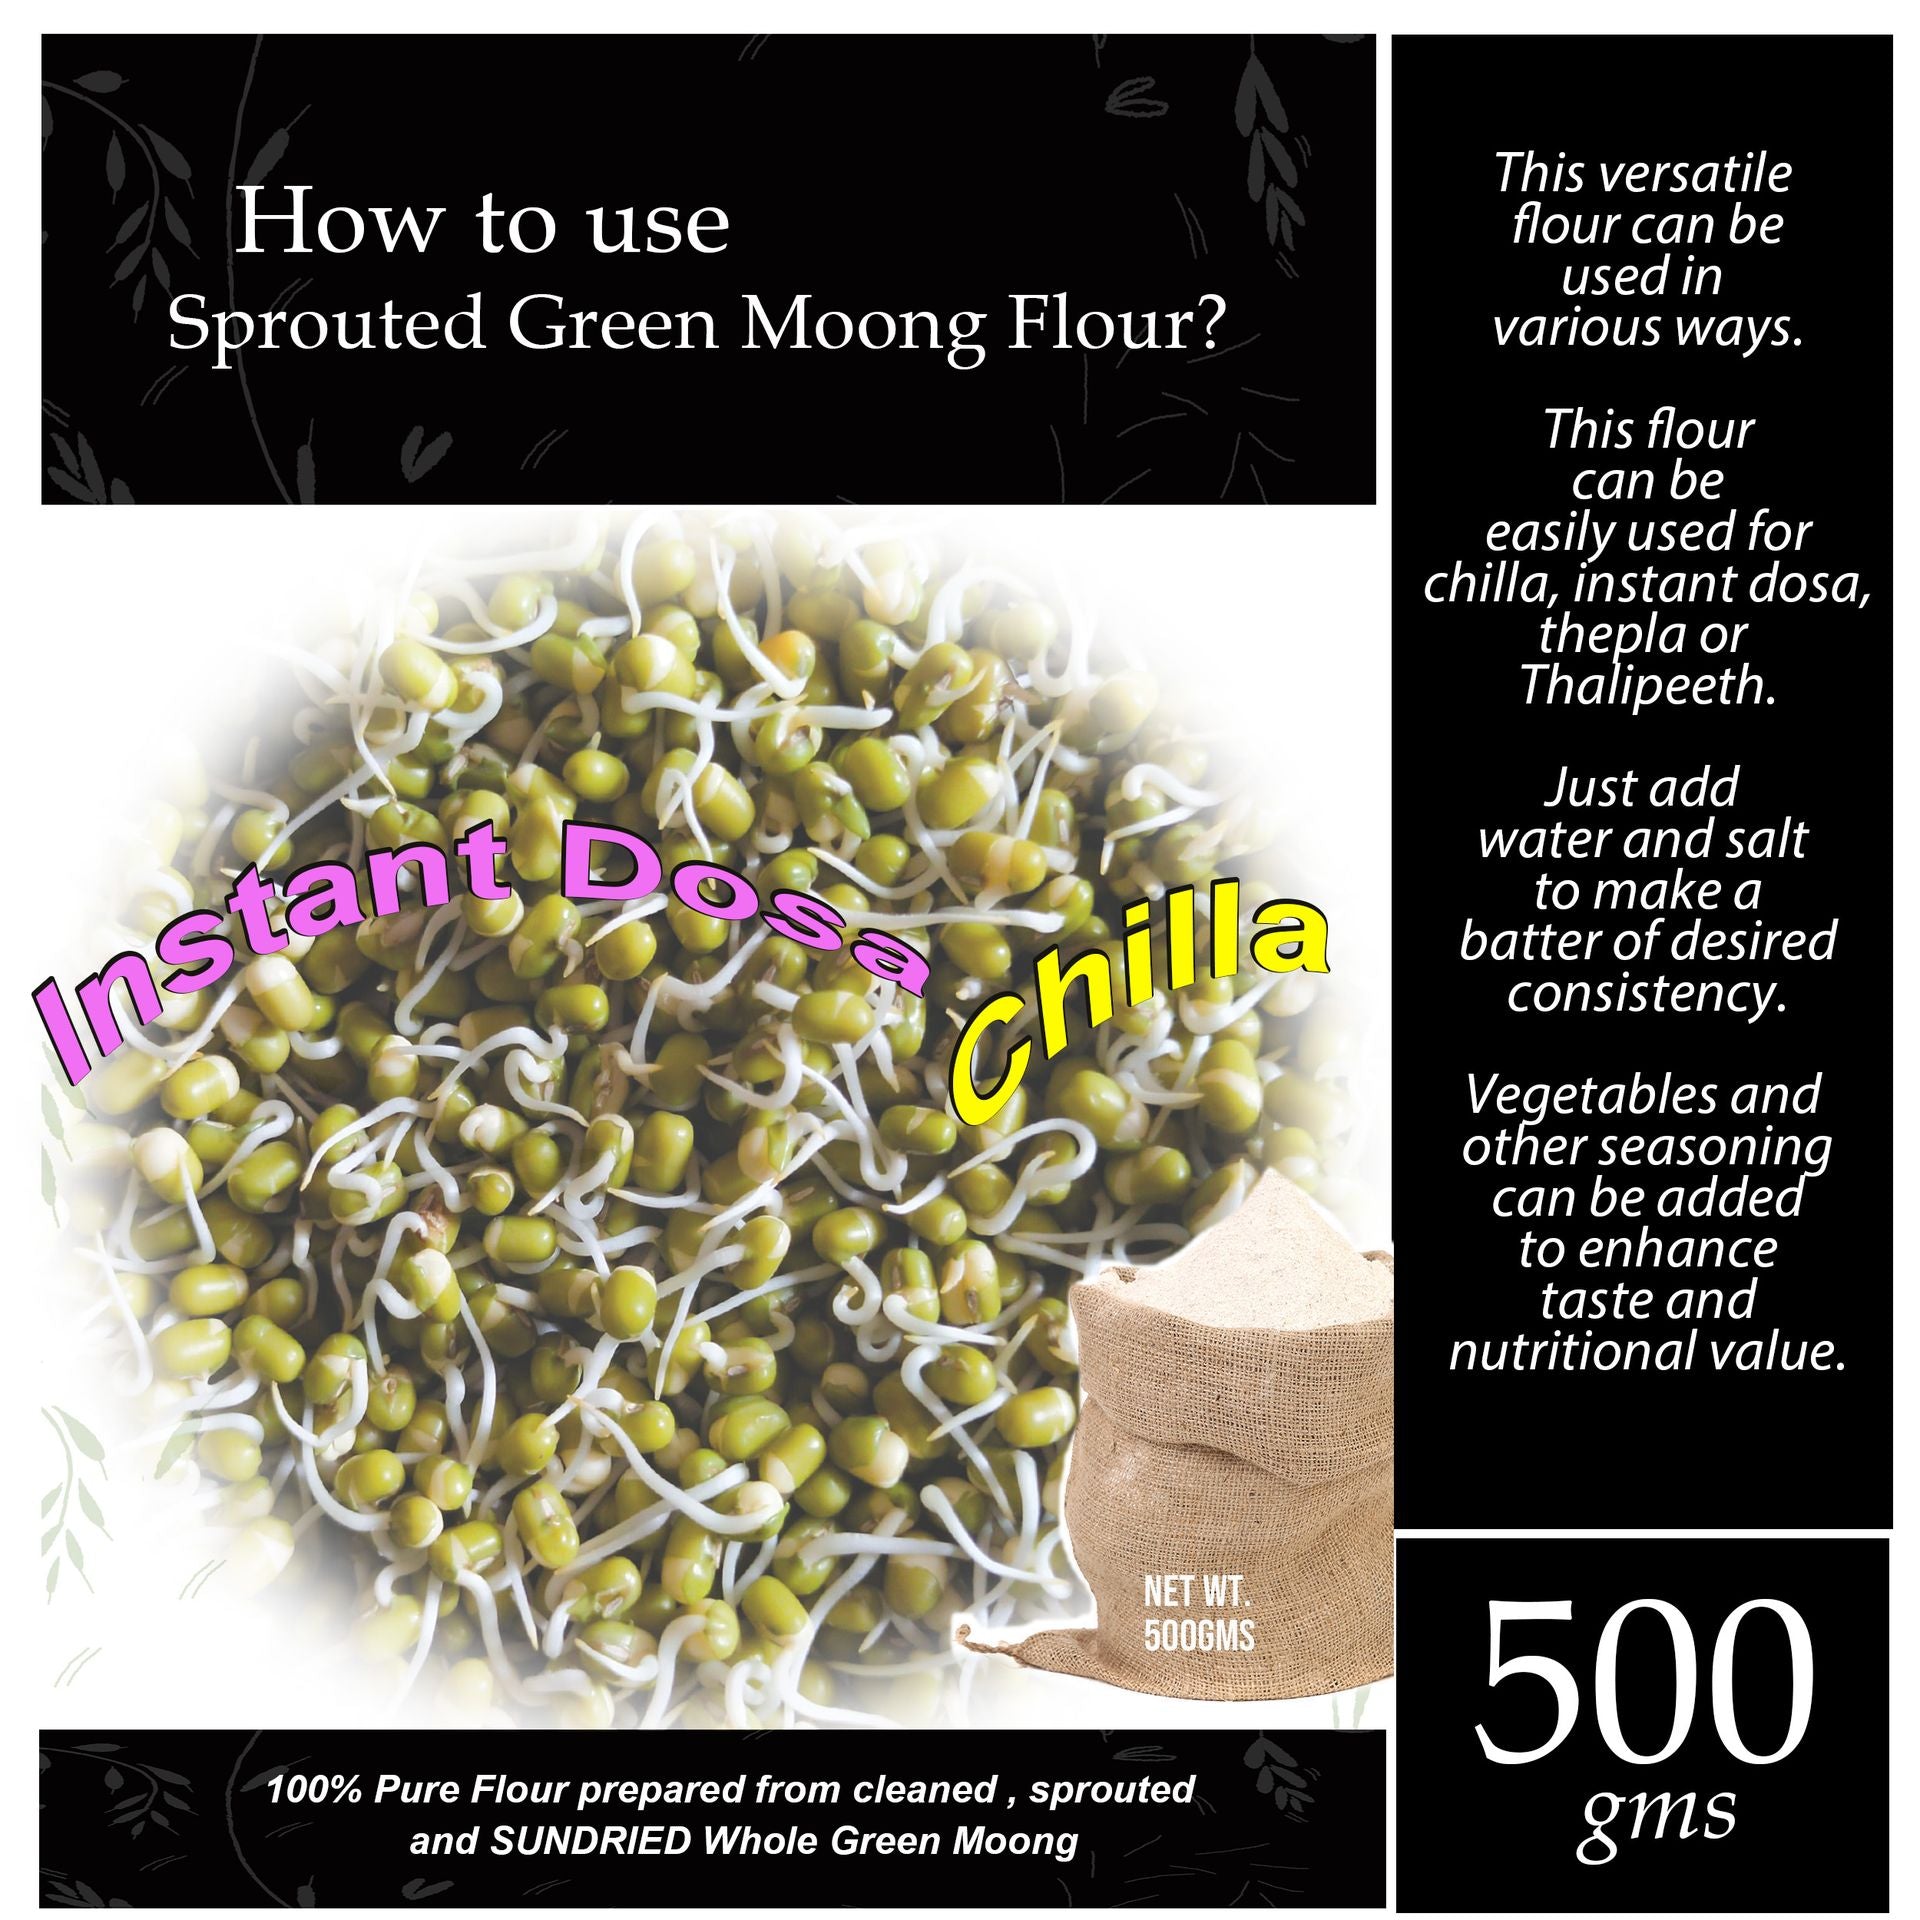 CURRYFEAST Sprouted Green Moong Flour - hfnl!fe